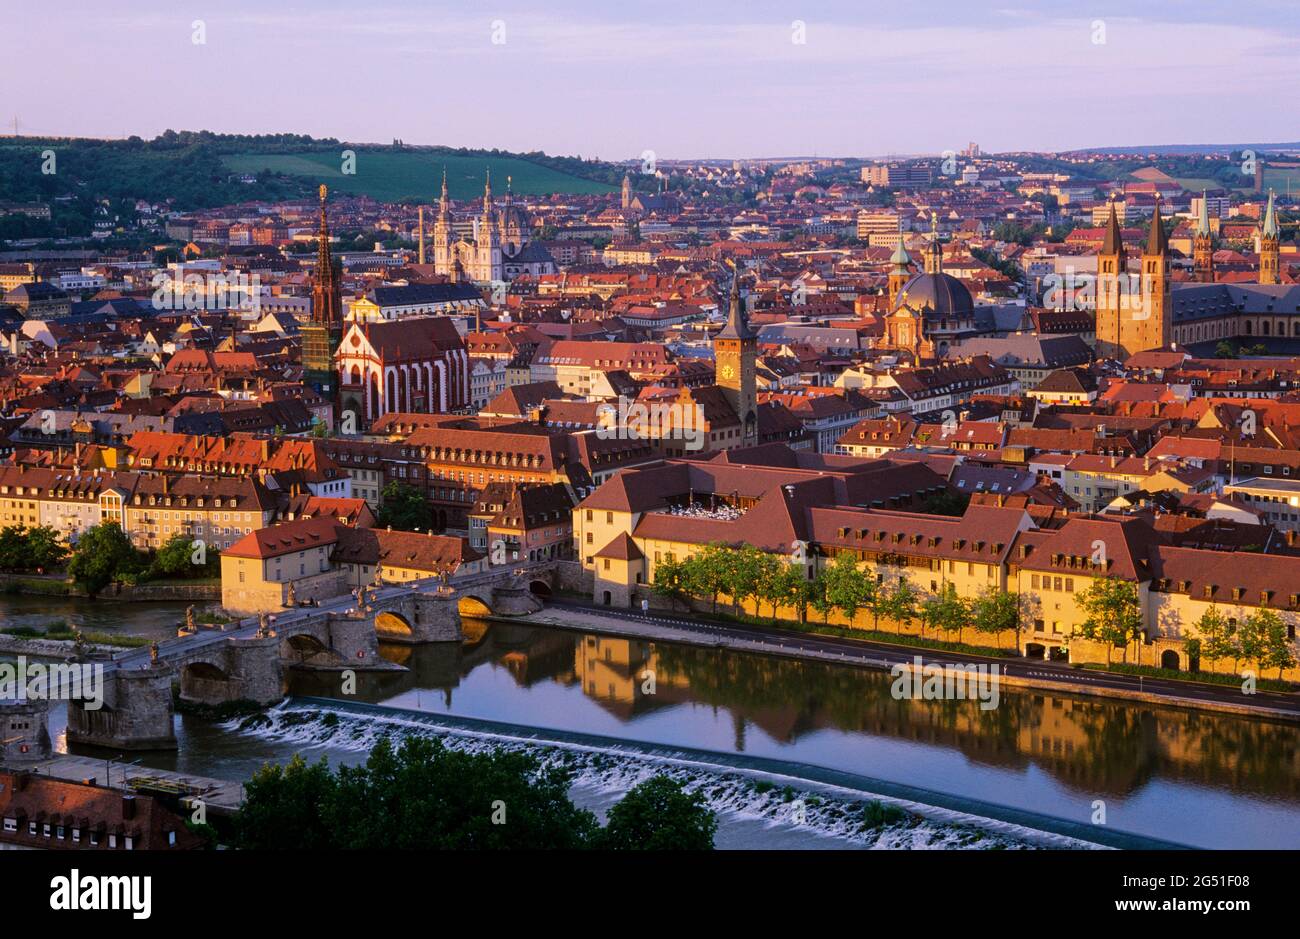 Aerial view of old town of Wurzburg at sunset, Bavaria, Germany Stock Photo